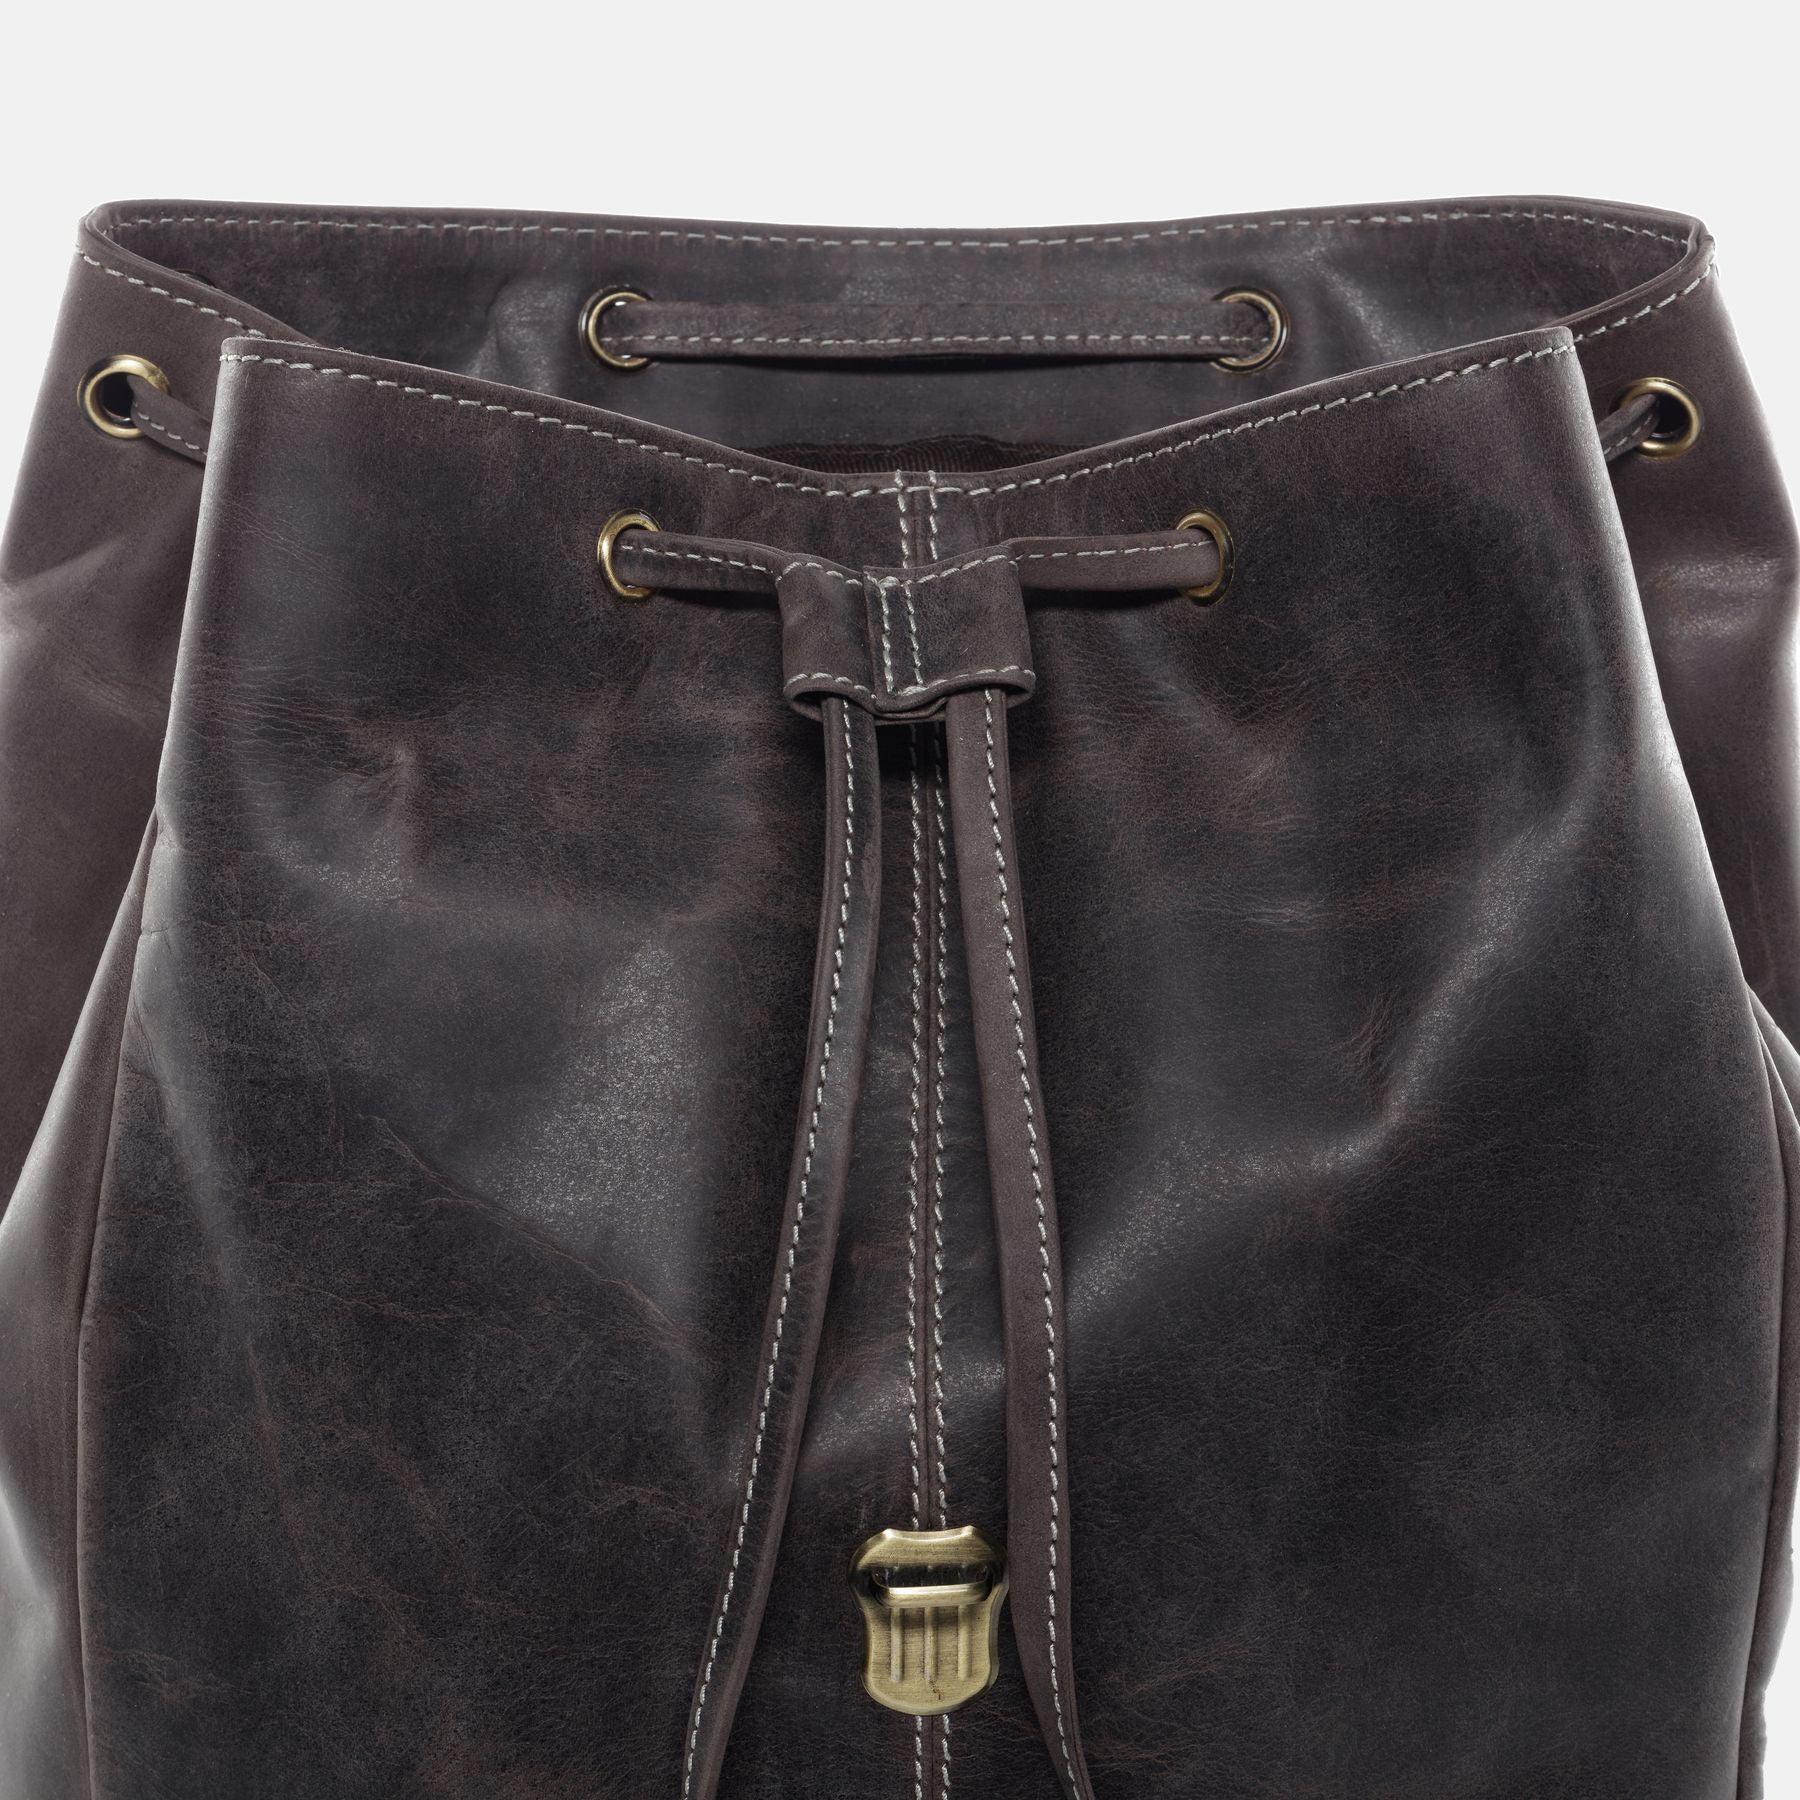 City backpack STAN buffalo leather brown